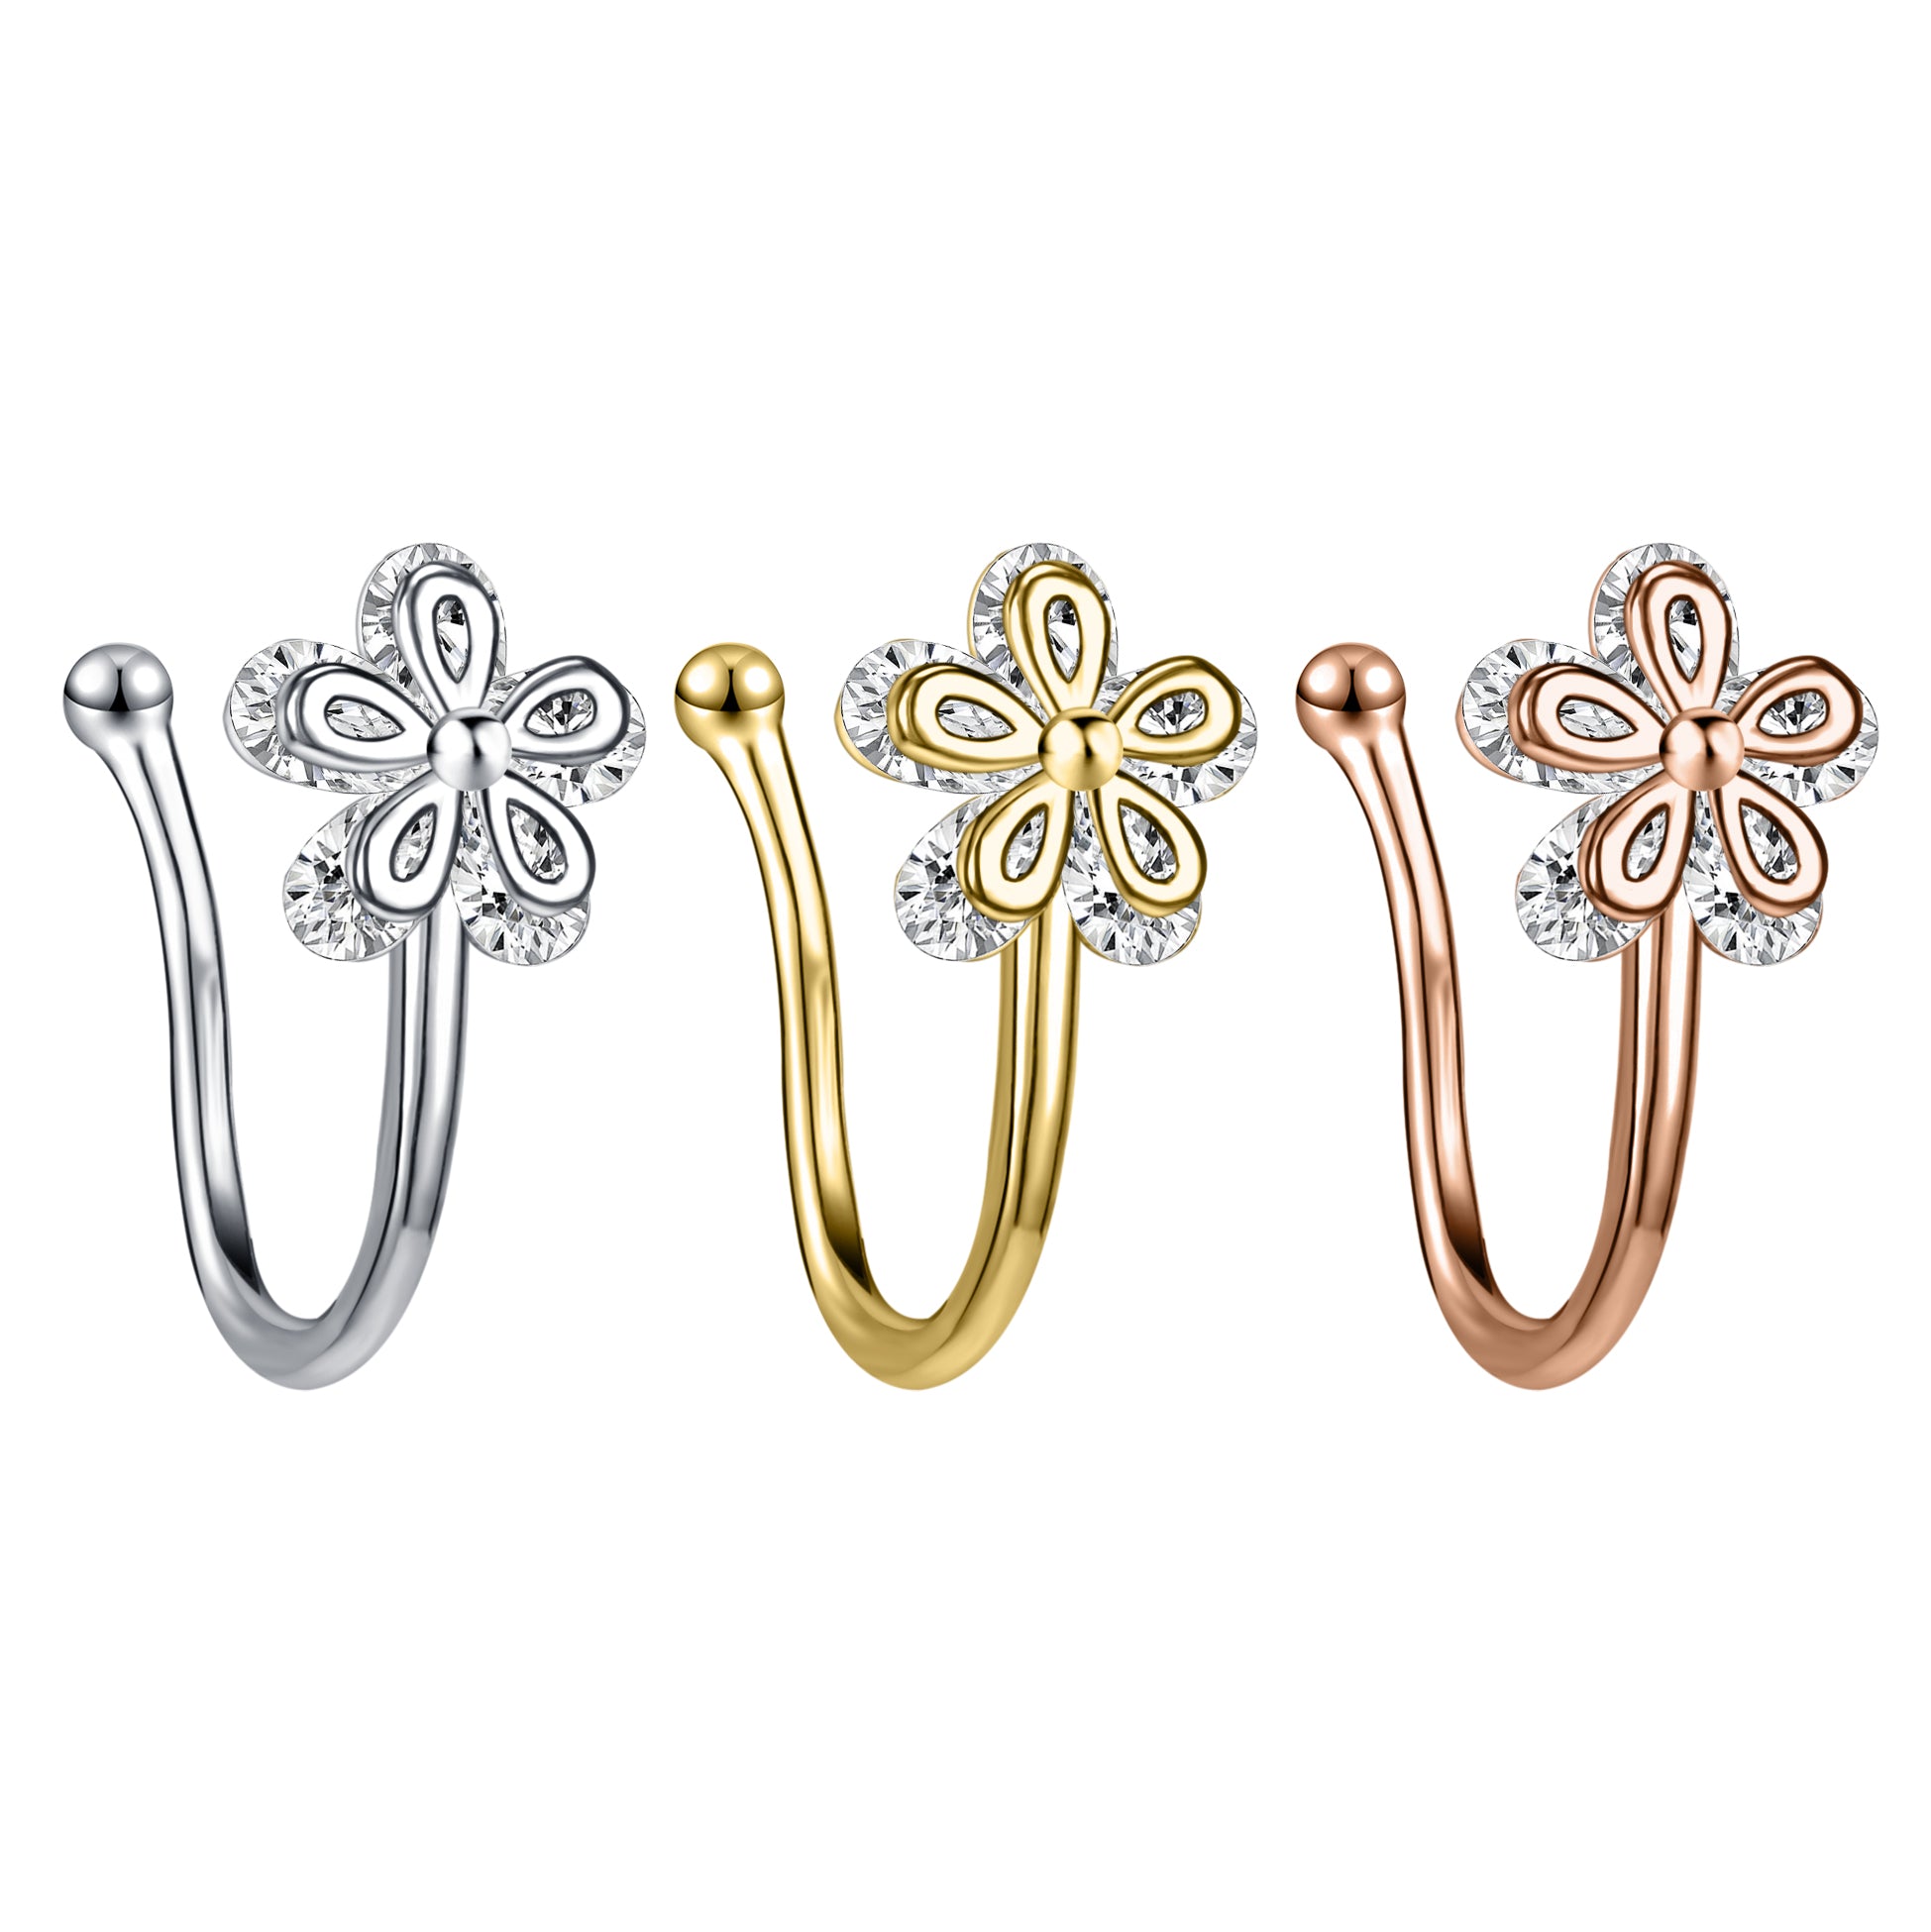 zs-white-zircon-flower-u-shaped-nose-clip-simple-stainless-steel-fake-nose-ring